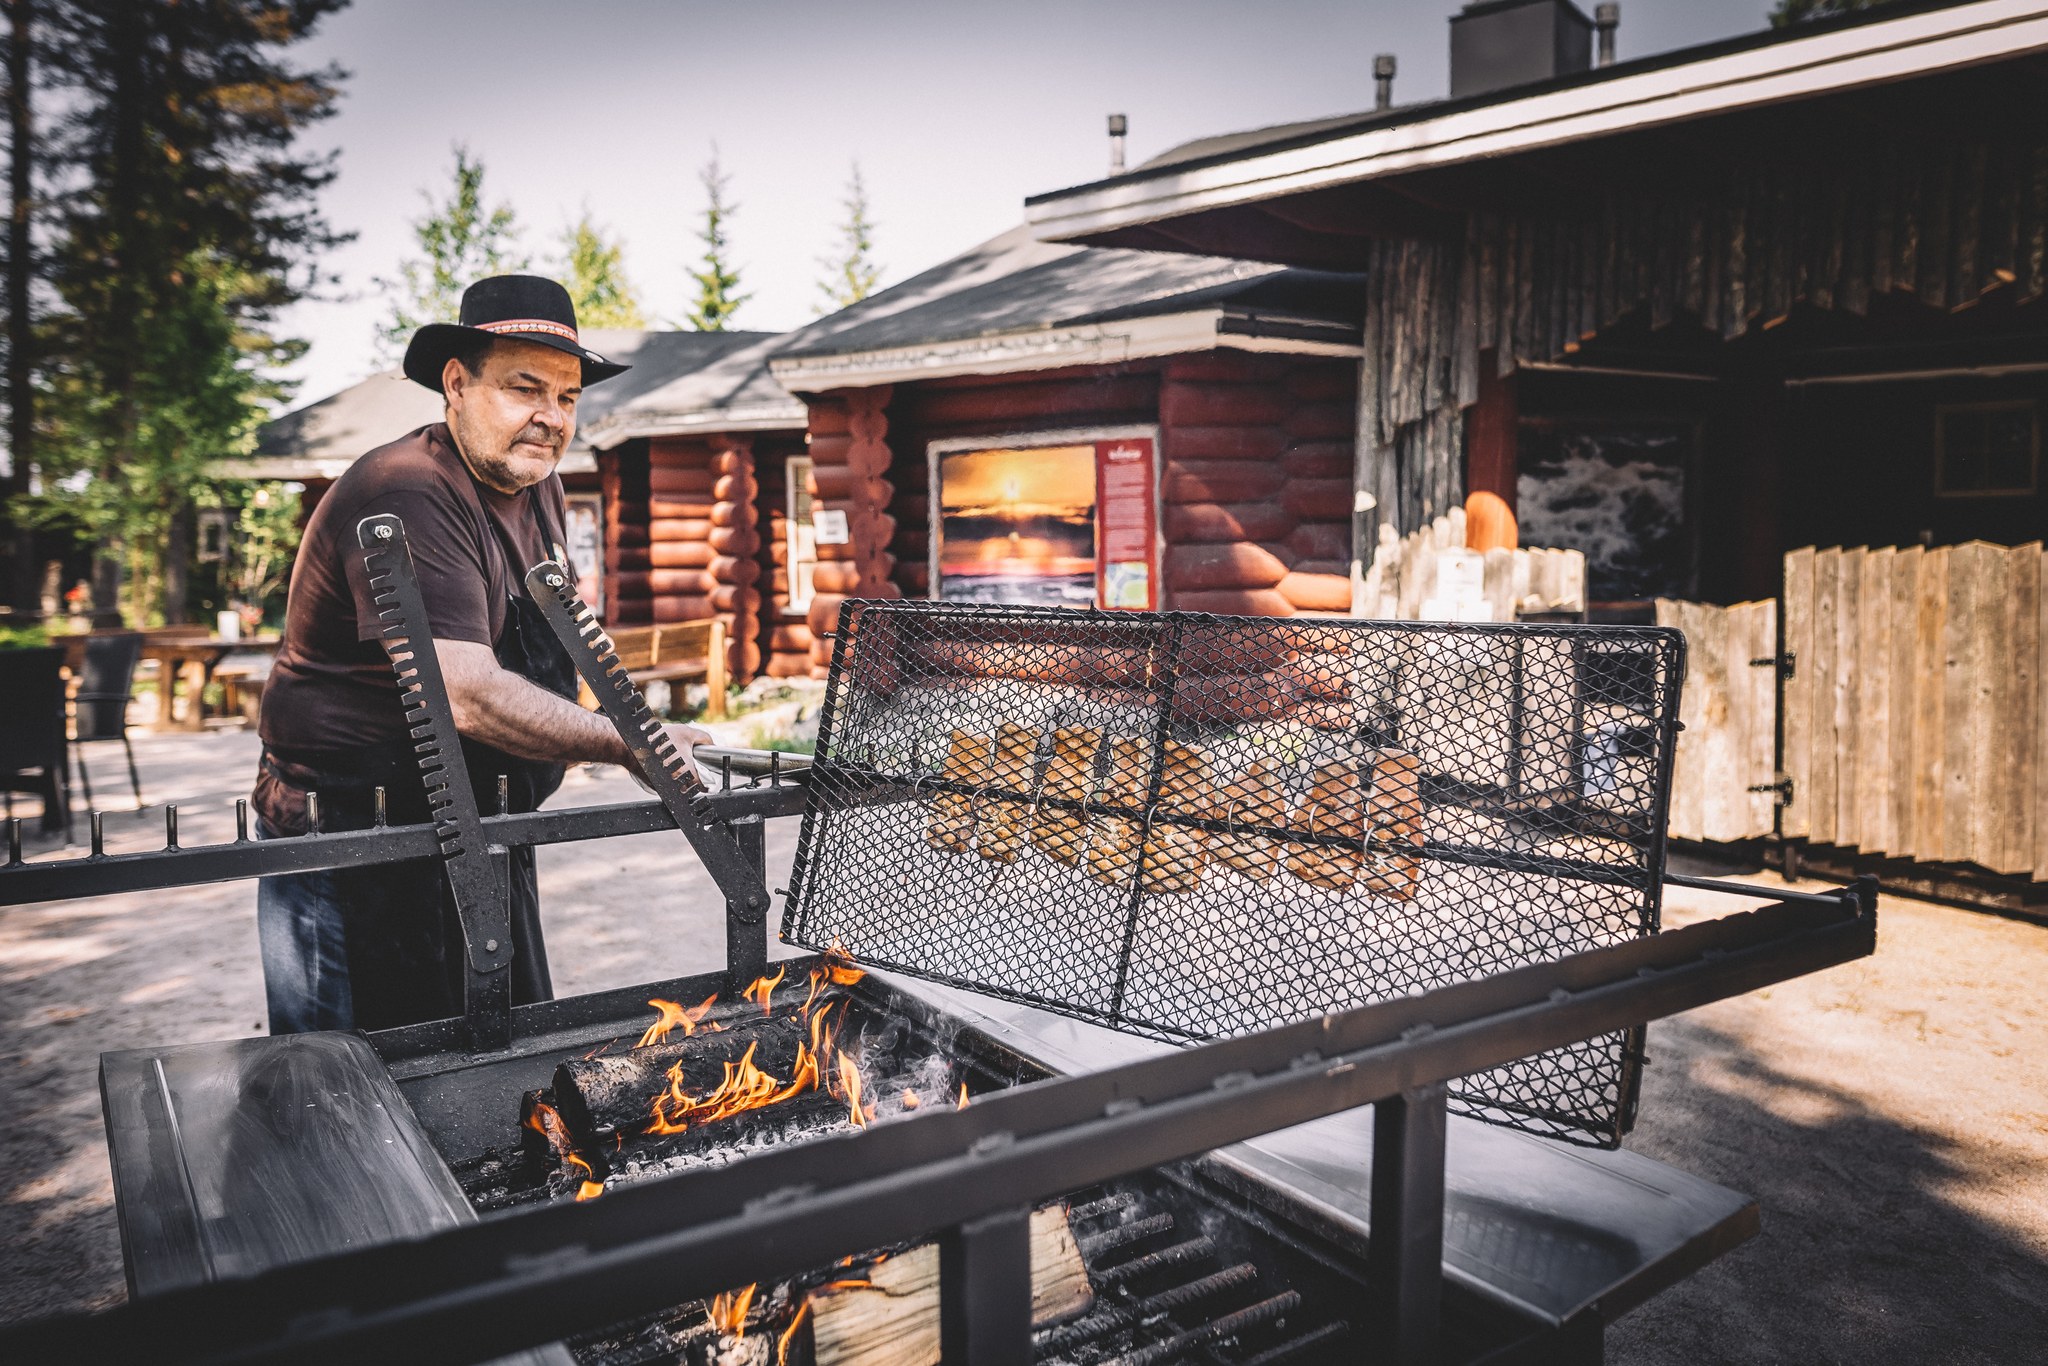 ummer-outdoor-restaurant-in-santamus-at-the-arctic-circle-lunch-prepared-over-an-open-fire-